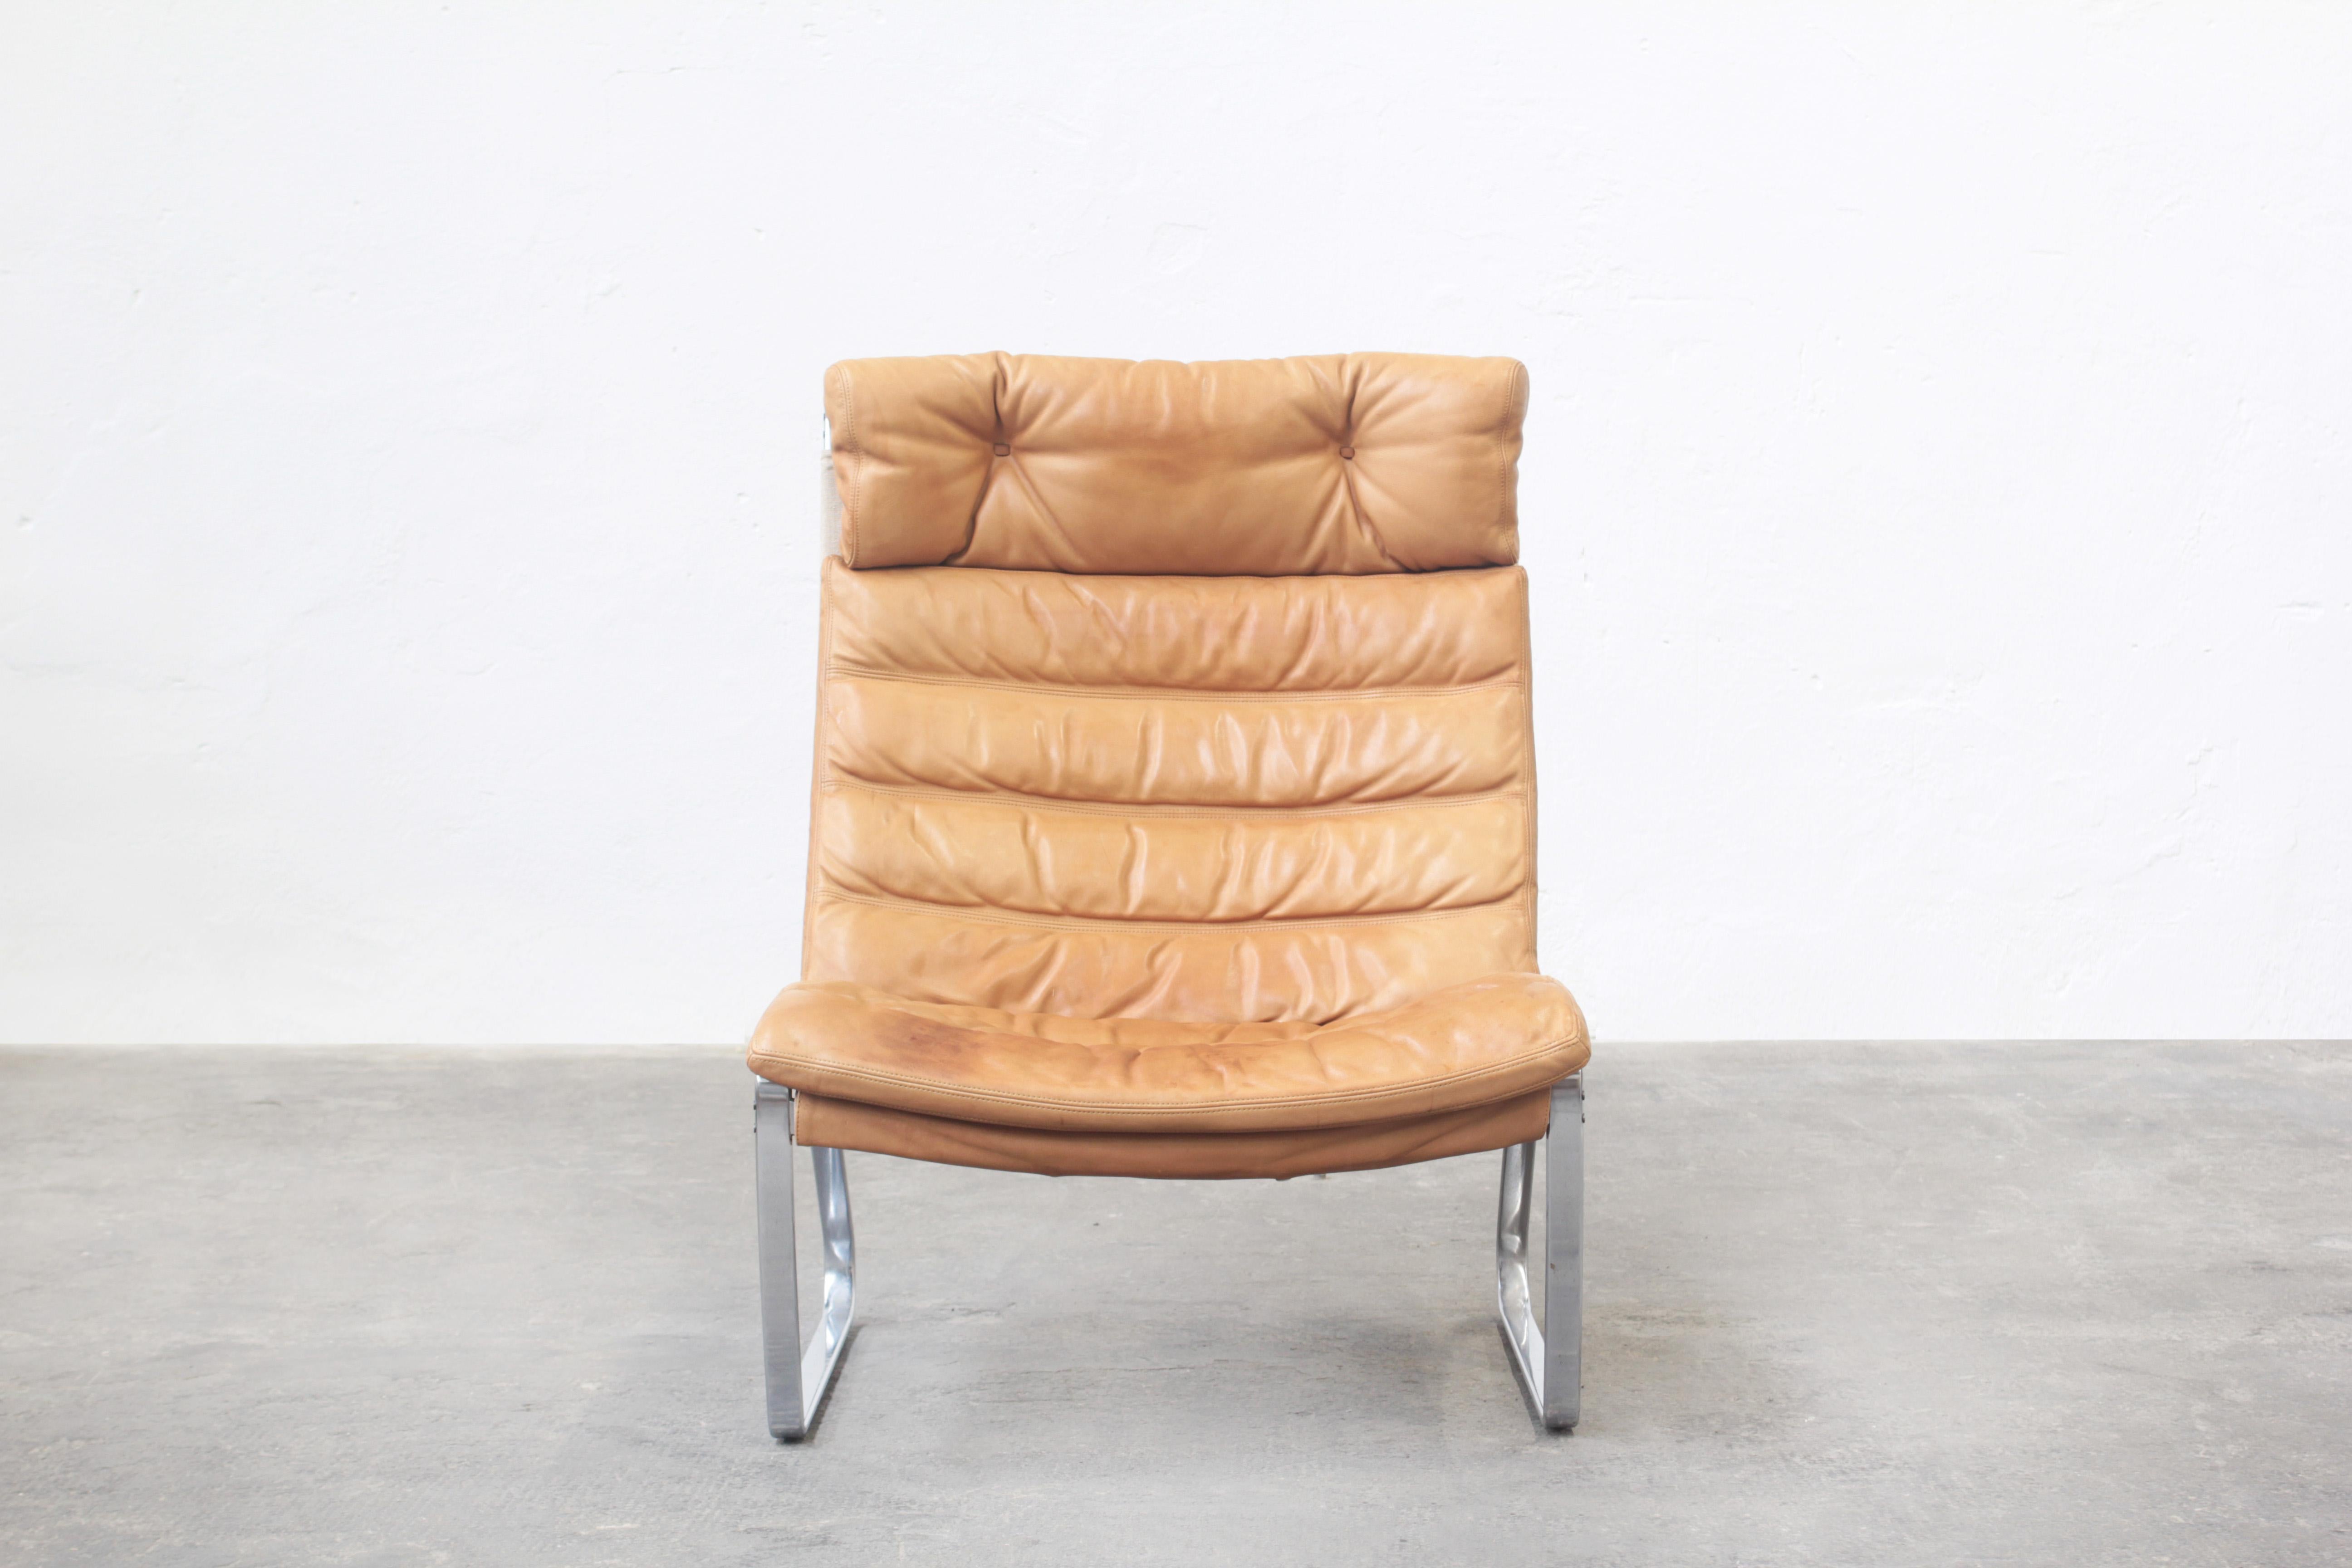 Mid-20th Century Danish Lounge Chair by Jorgen Kastholm for Alfred Kill International, 1968